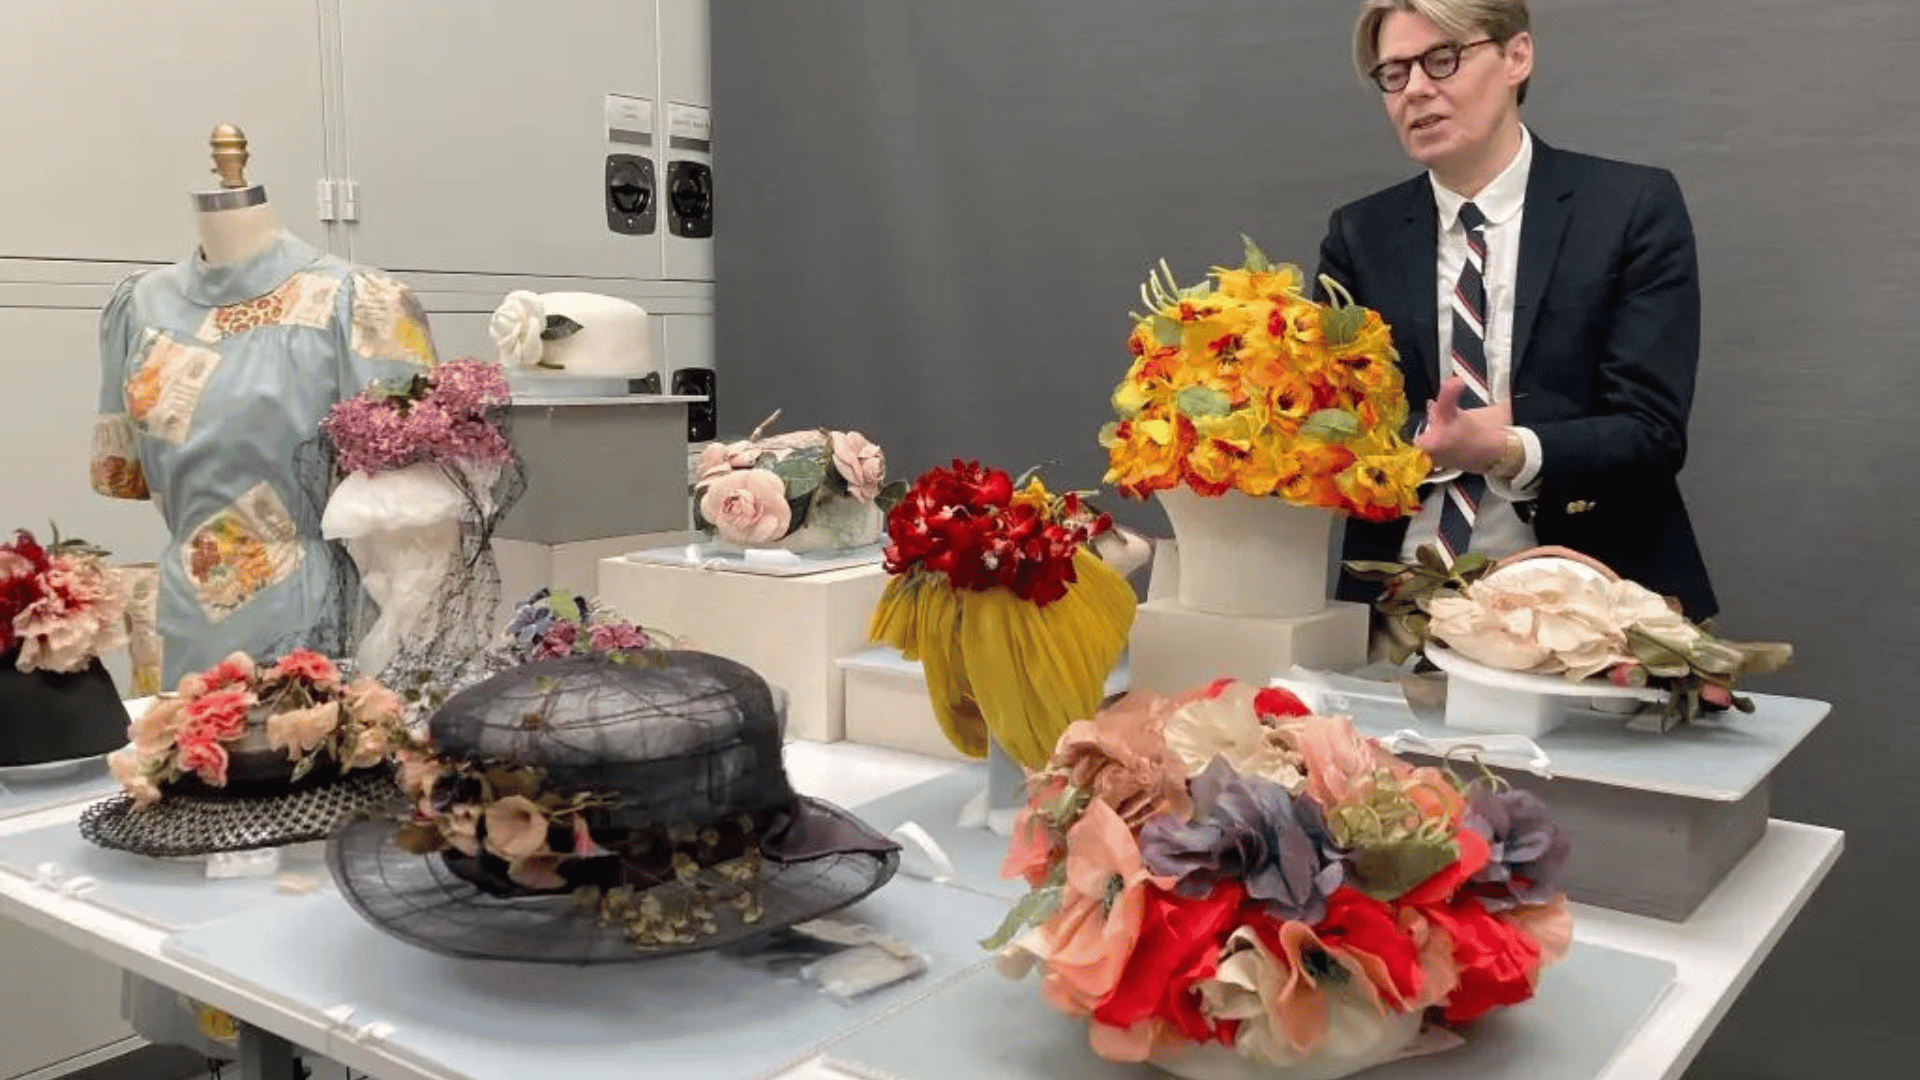 Bolton teased that the showcase will grant museum visitors “sensorial ‘access’ to rare historical garments and rarefied contemporary fashions.” AP